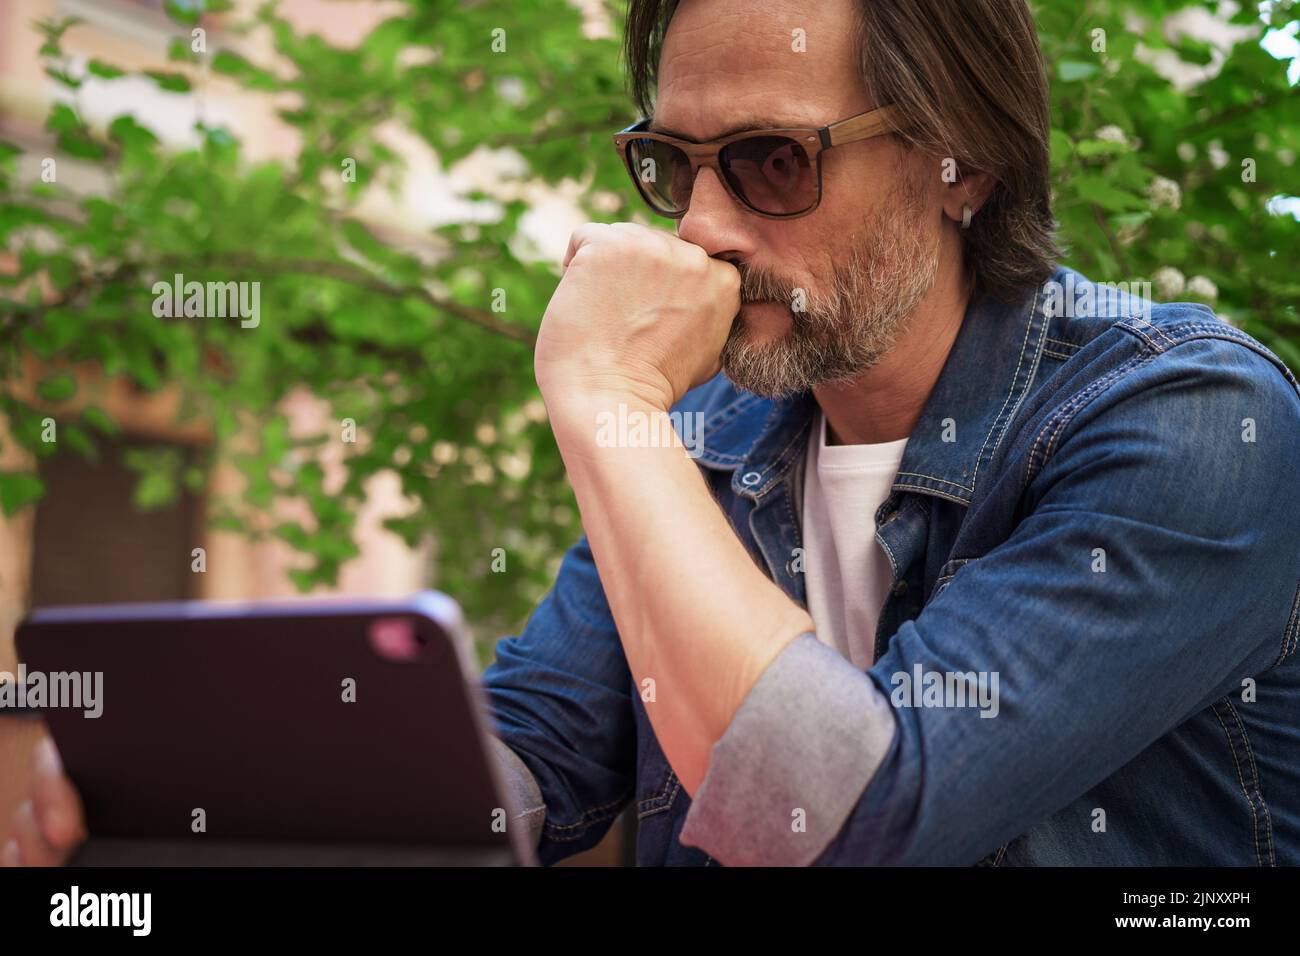 Puzzled up, sad middle aged man working outdoors using digital tablet. Handsome freelancer traveling man not happy checking work or social media sitting at city street cafe.  Stock Photo